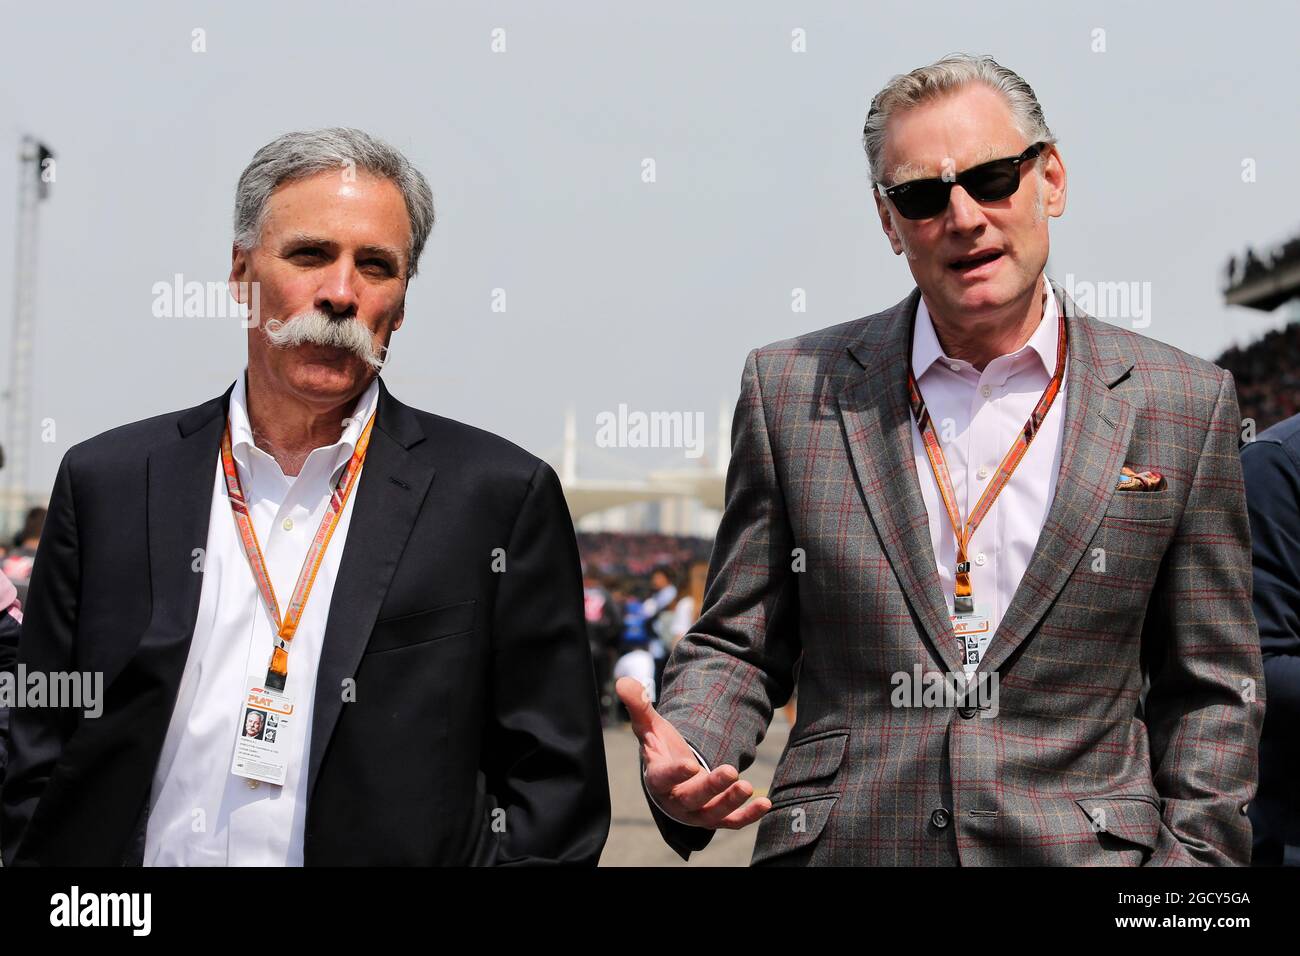 (L to R): Chase Carey (USA) Formula One Group Chairman with Sean Bratches (USA) Formula 1 Managing Director, Commercial Operations. Chinese Grand Prix, Sunday 15th April 2018. Shanghai, China. Stock Photo